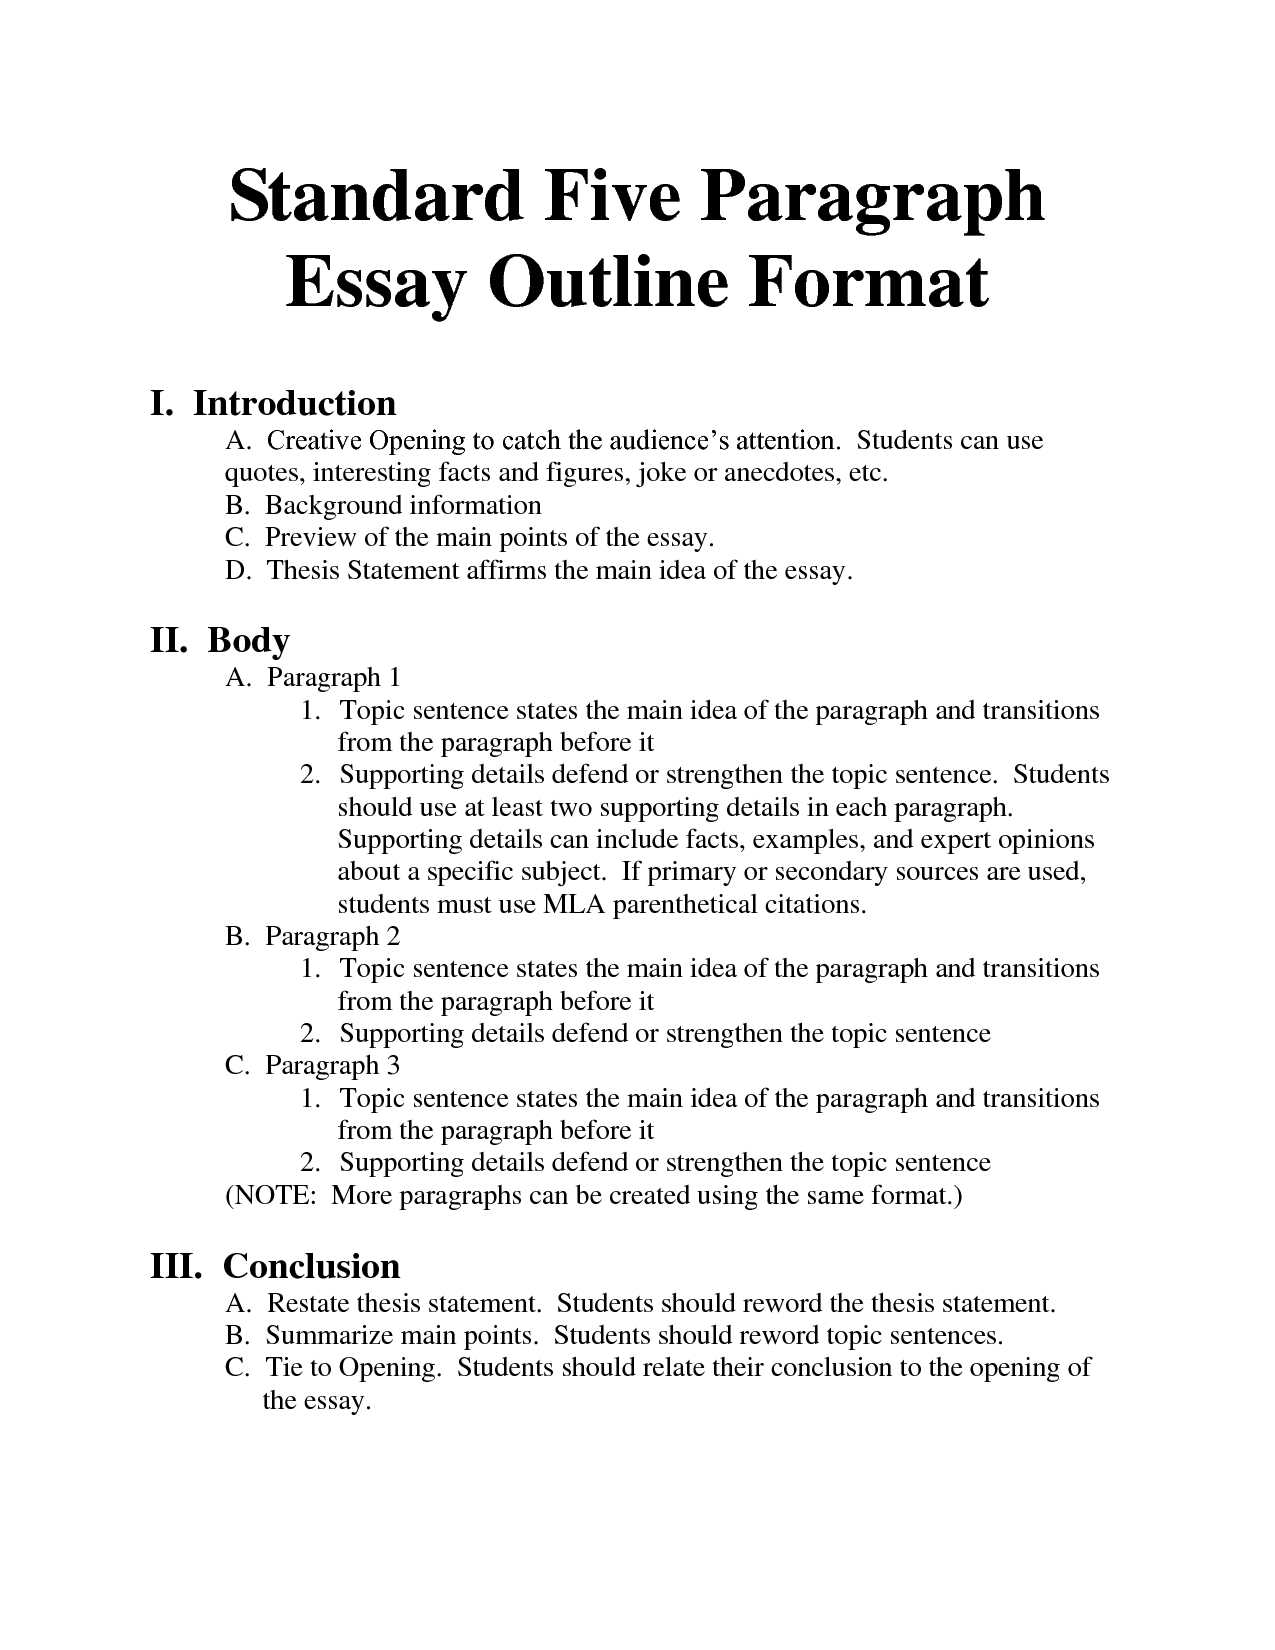 Nuclear Chemistry Worksheet Along with Blank Essay Outline How to Write A Five Paragraph Essay Outline How